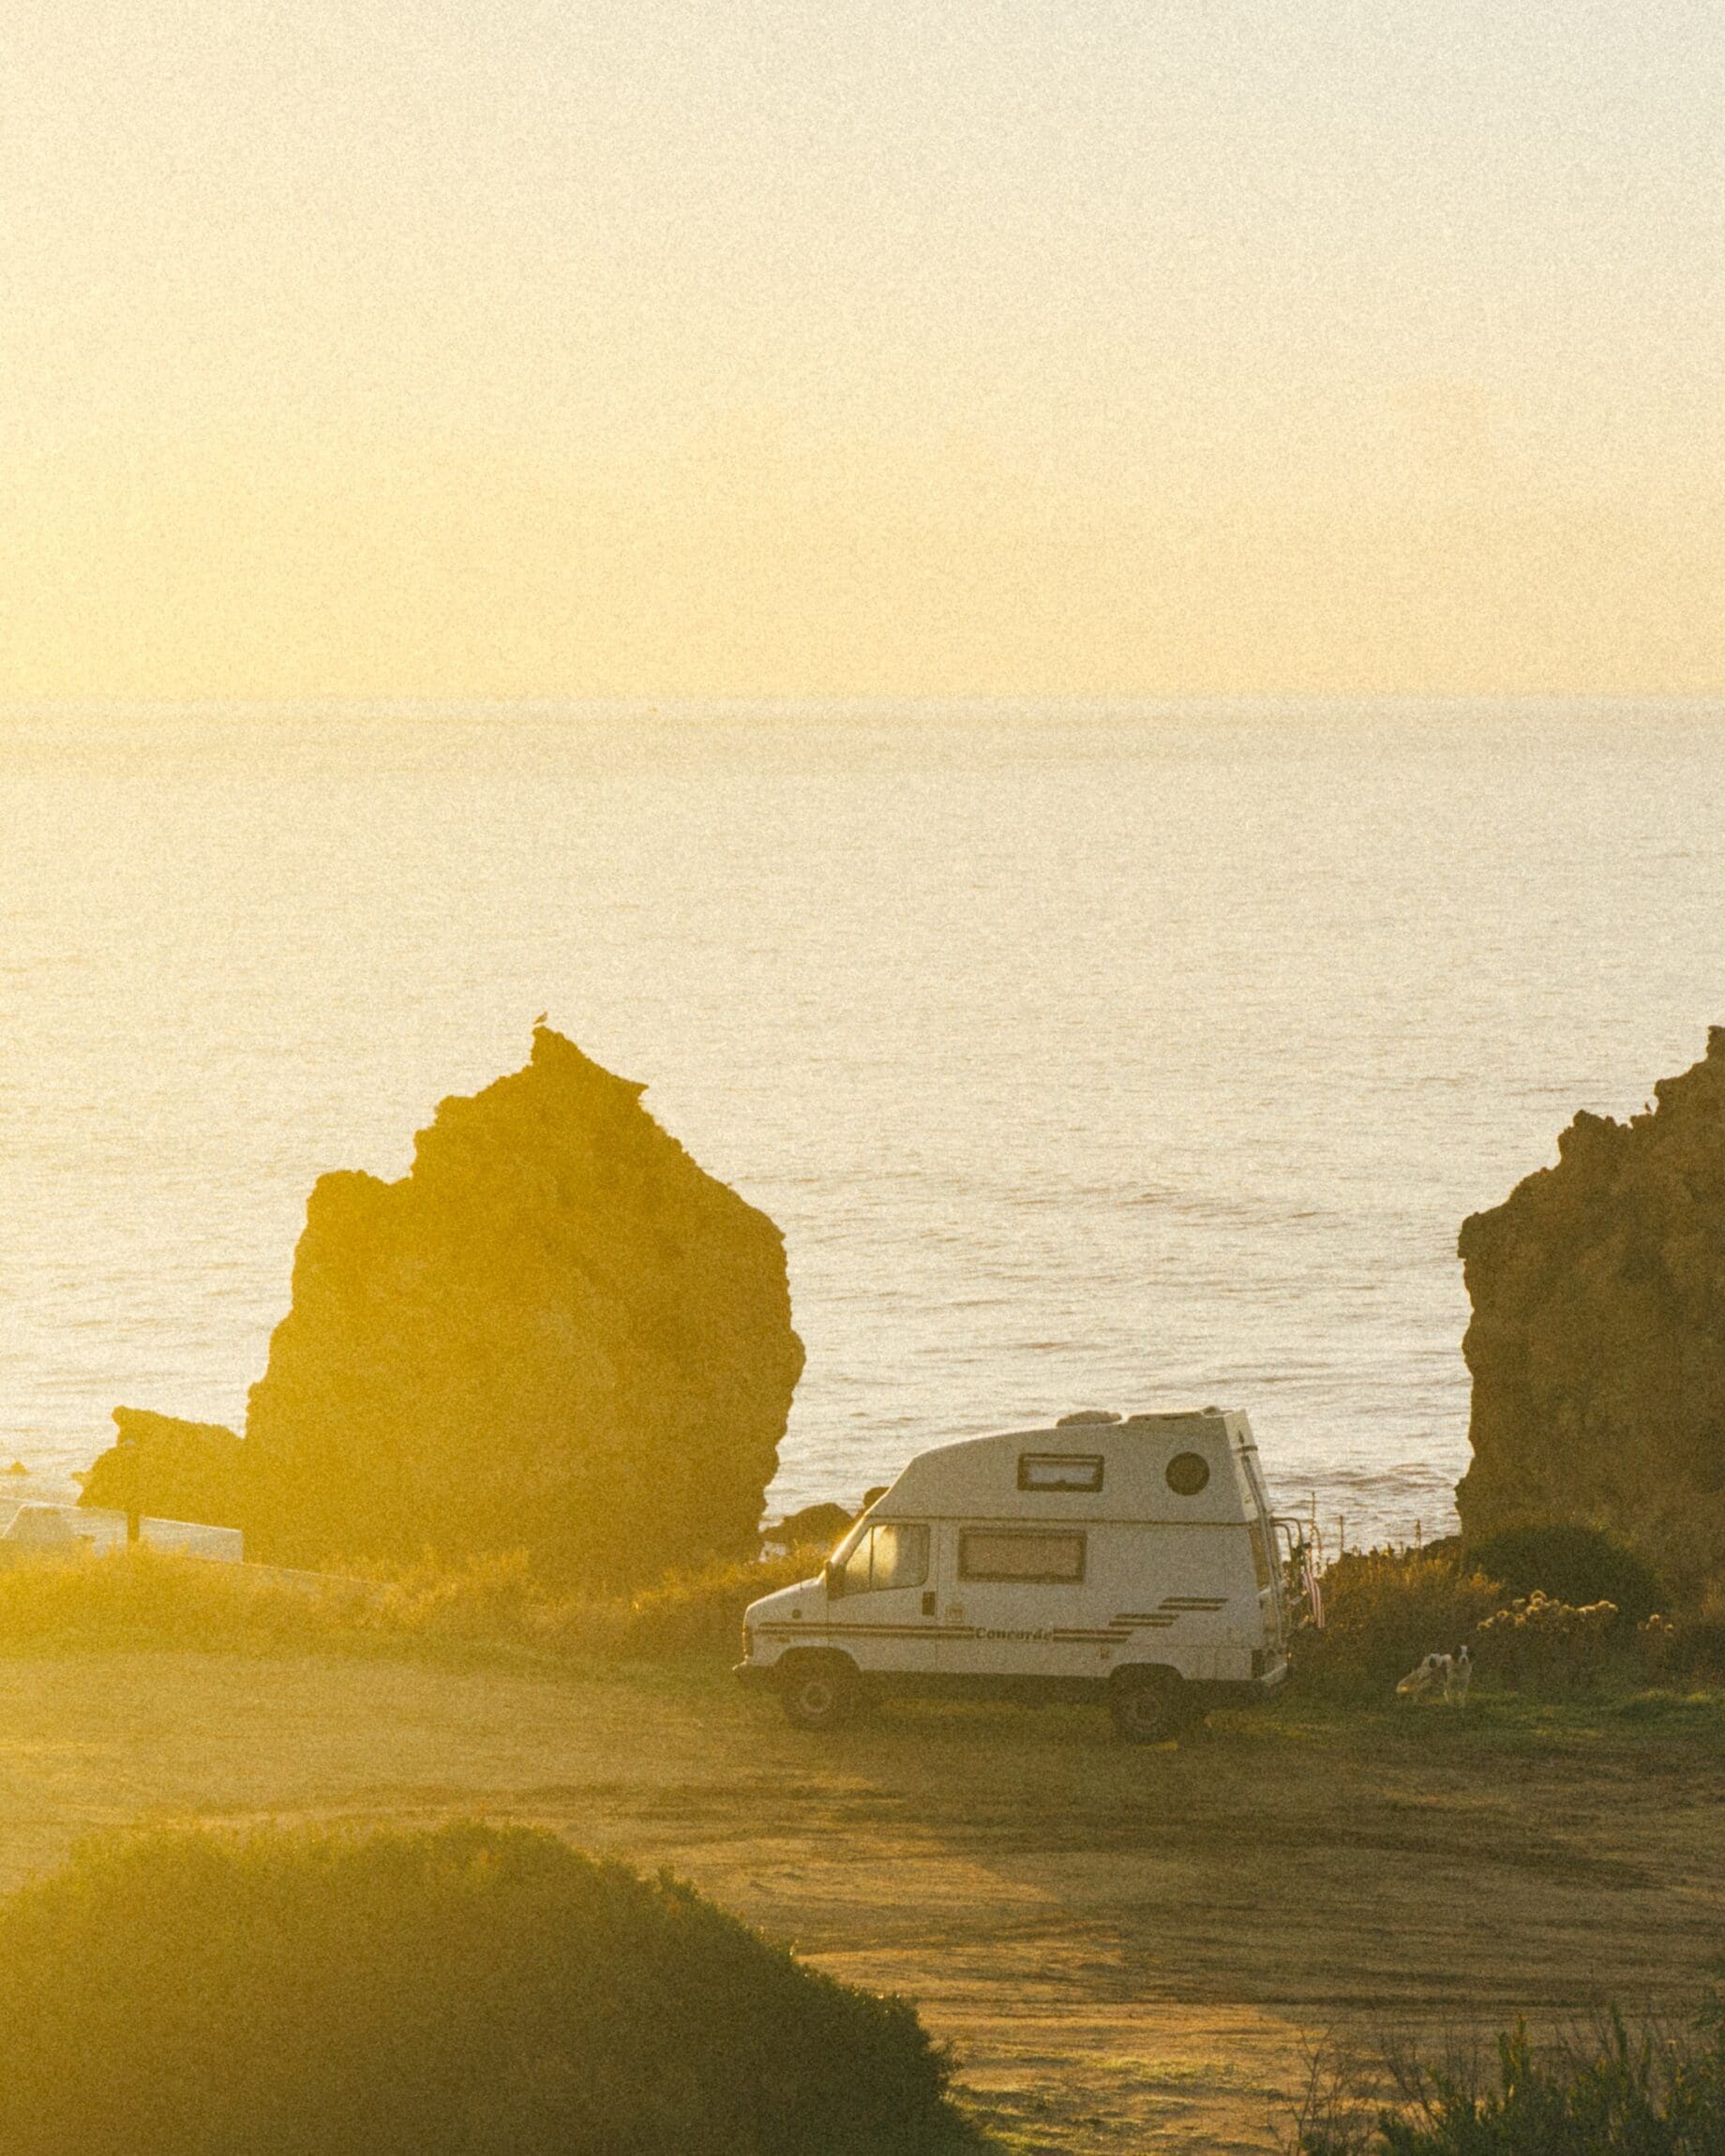 How is van life evolving? A fan against a hazy yellow sunset